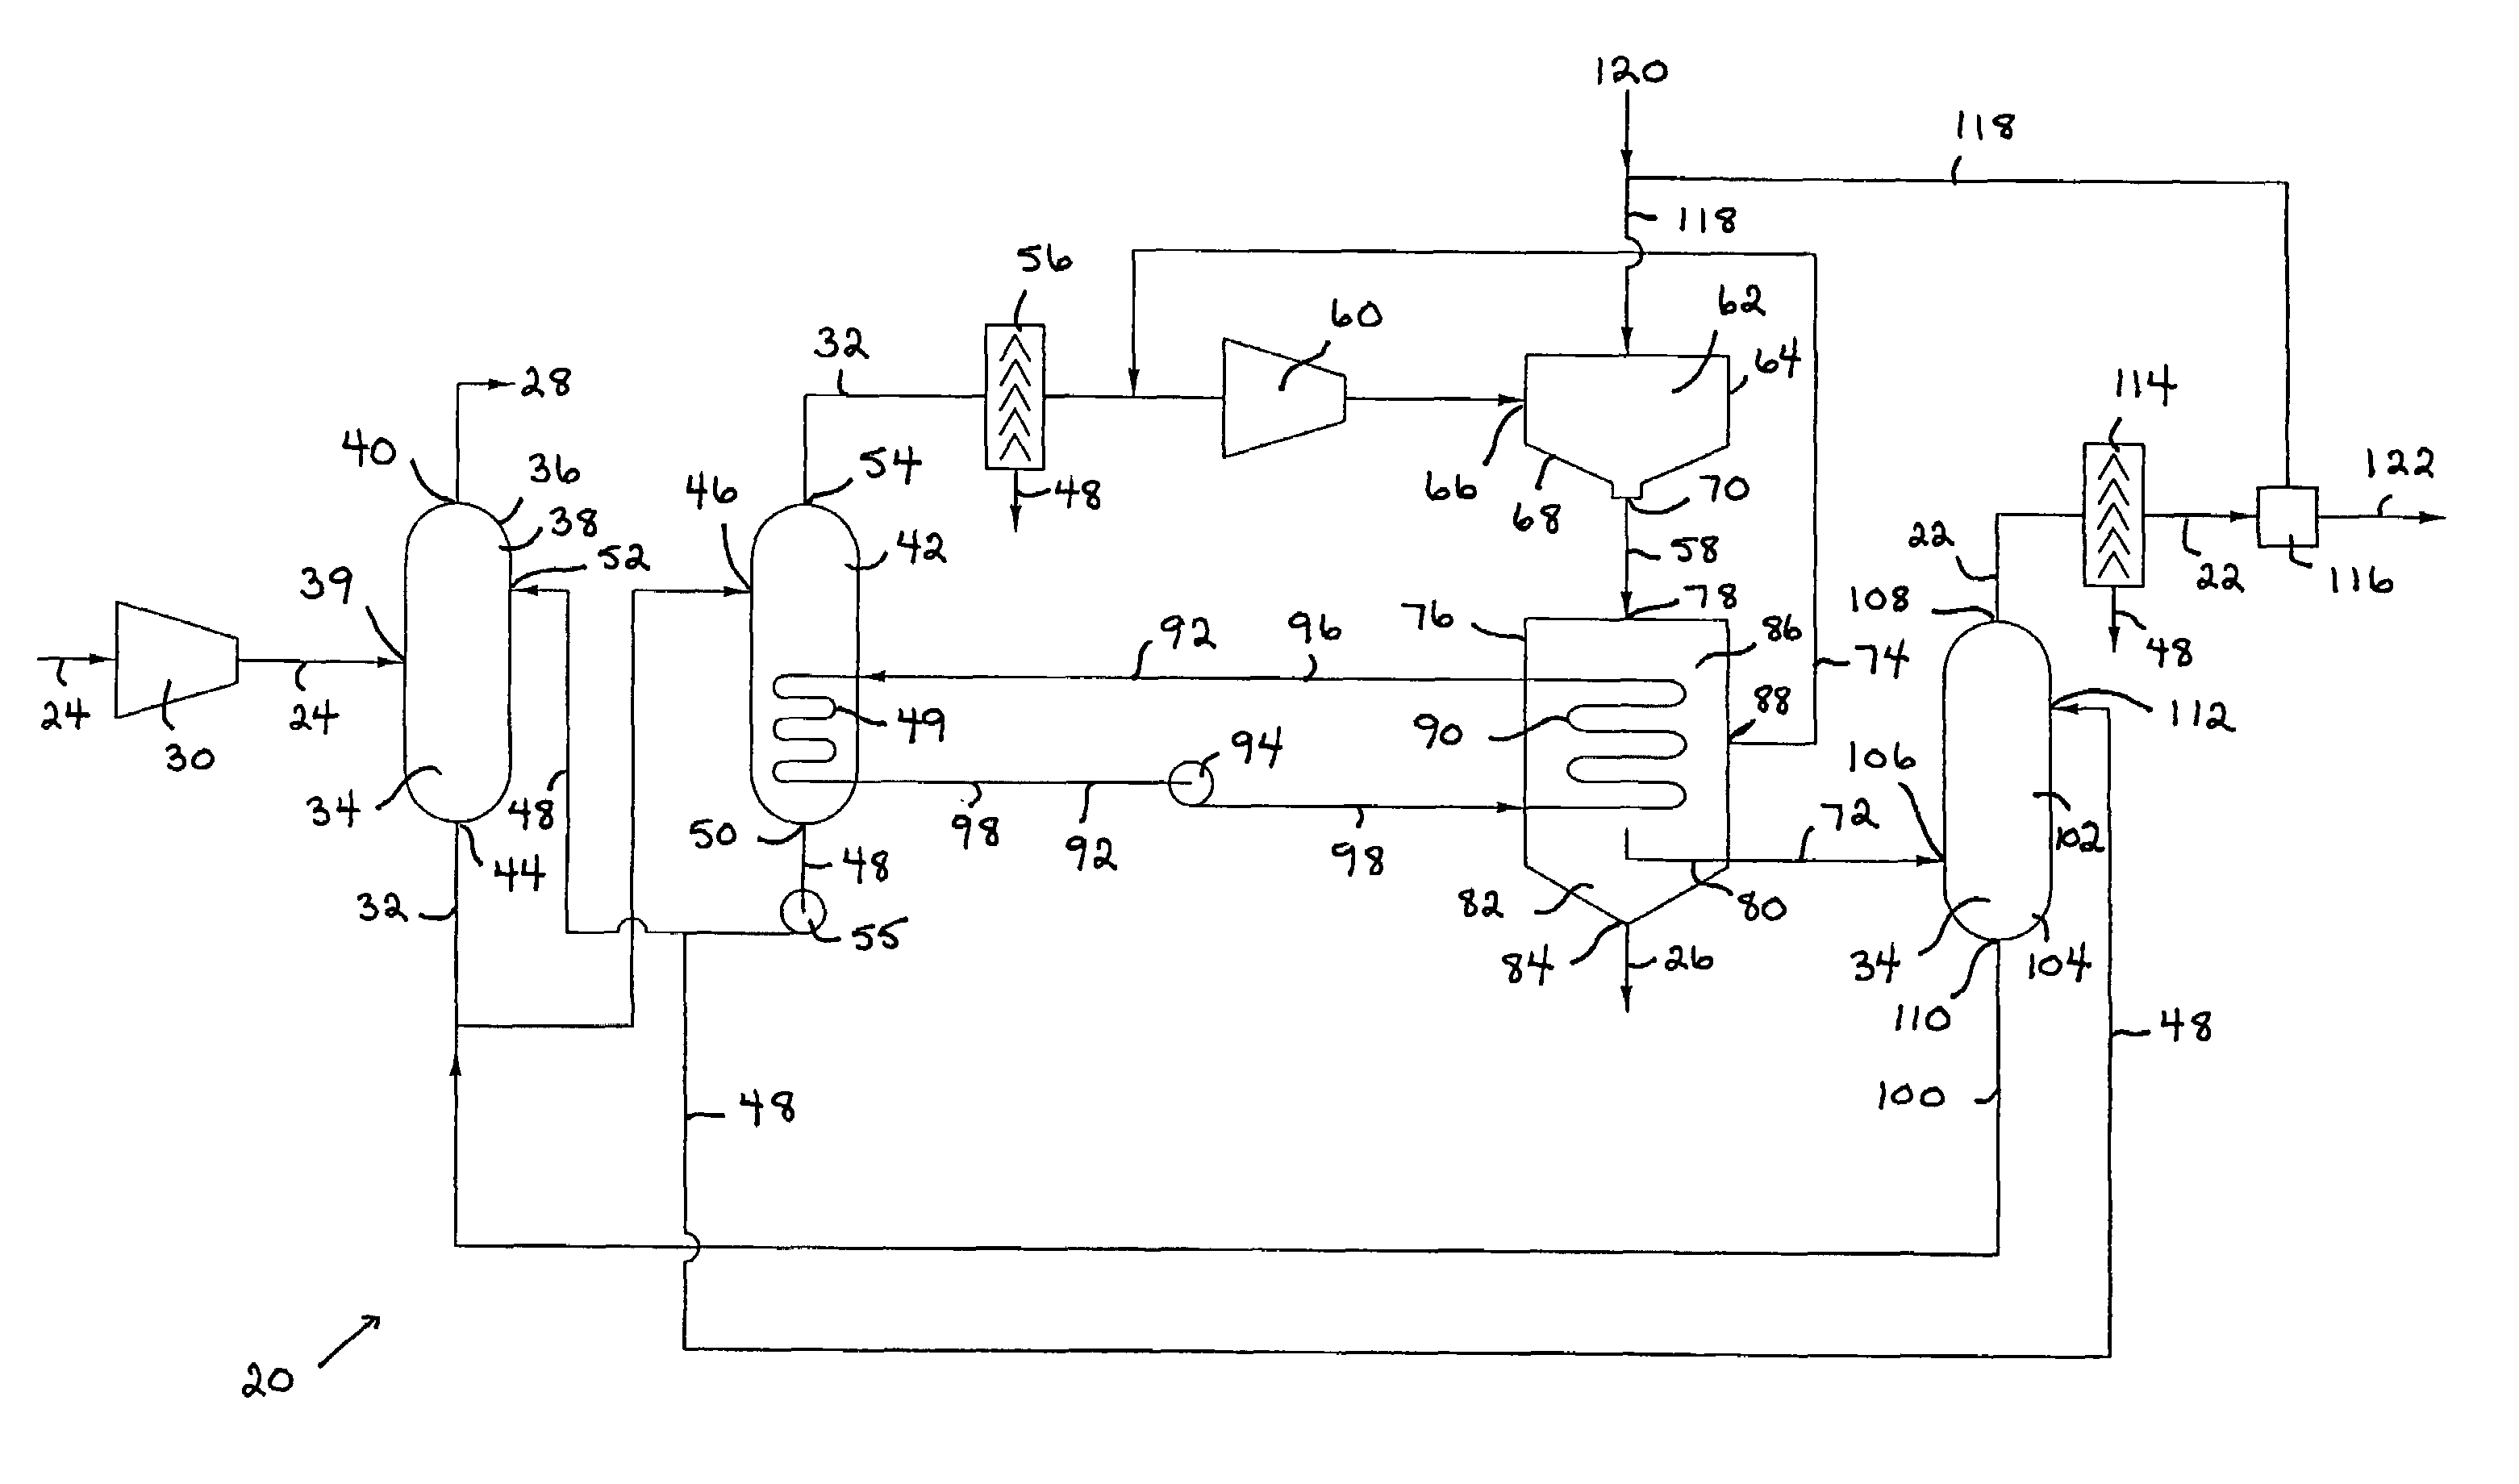 Process and apparatus for converting hydrogen sulfide into hydrogen and sulfur